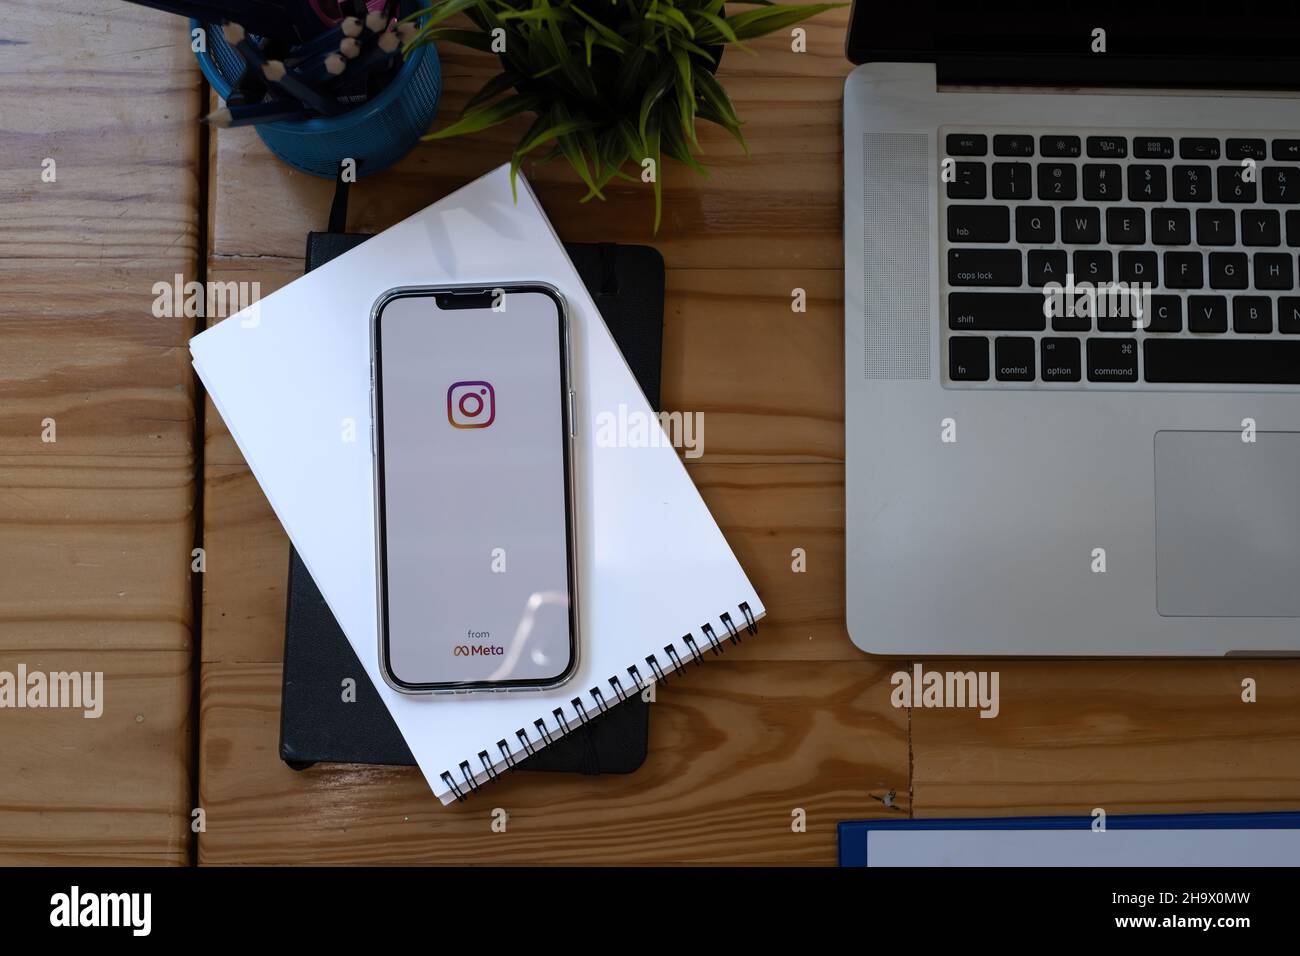 CHIANG MAI, THAILAND - DEC 03, 2021: iPhone 13 Pro Max with logo of instagram from meta. Instagram reels for making short videos and story. Stock Photo